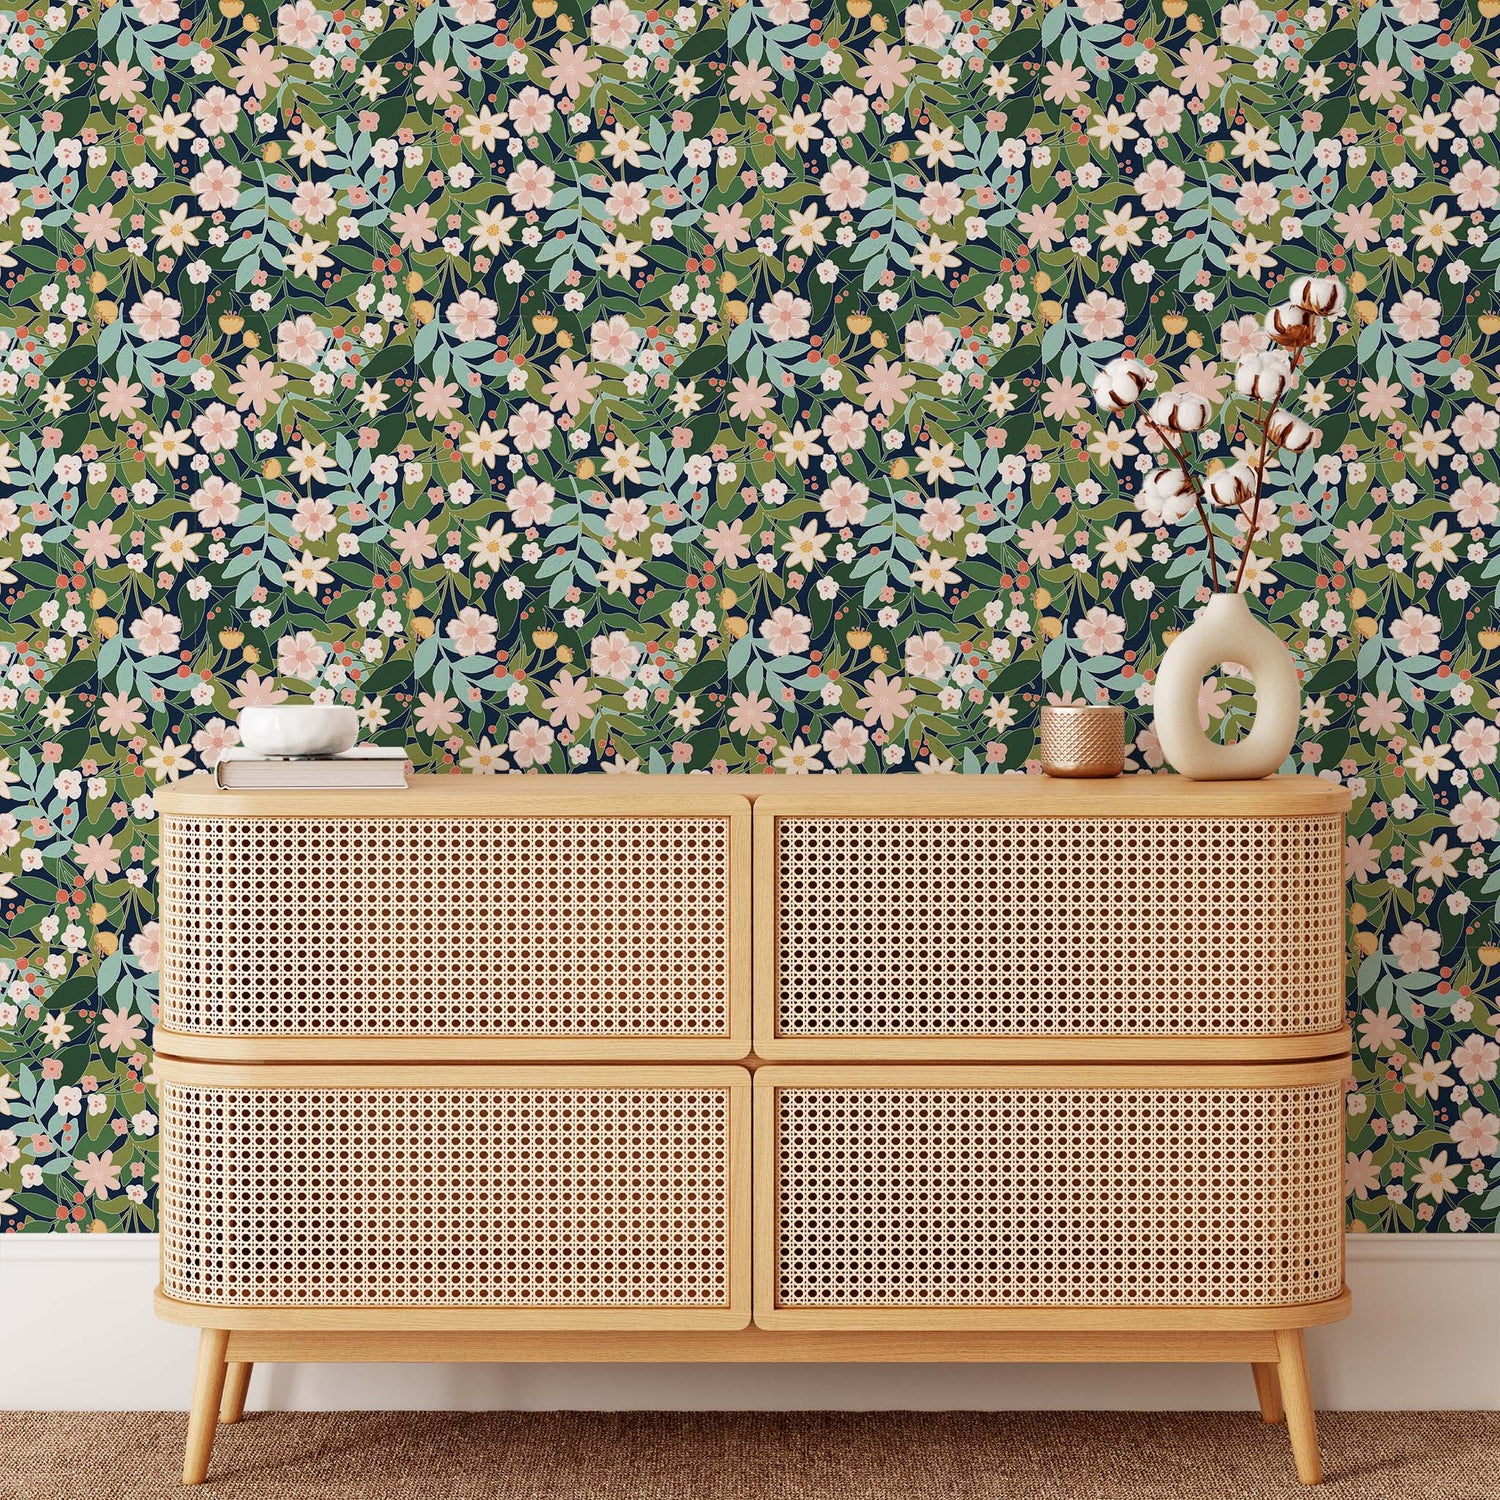 Bold floral design wallpaper in jewel green scattered flowers shown in a full size image.